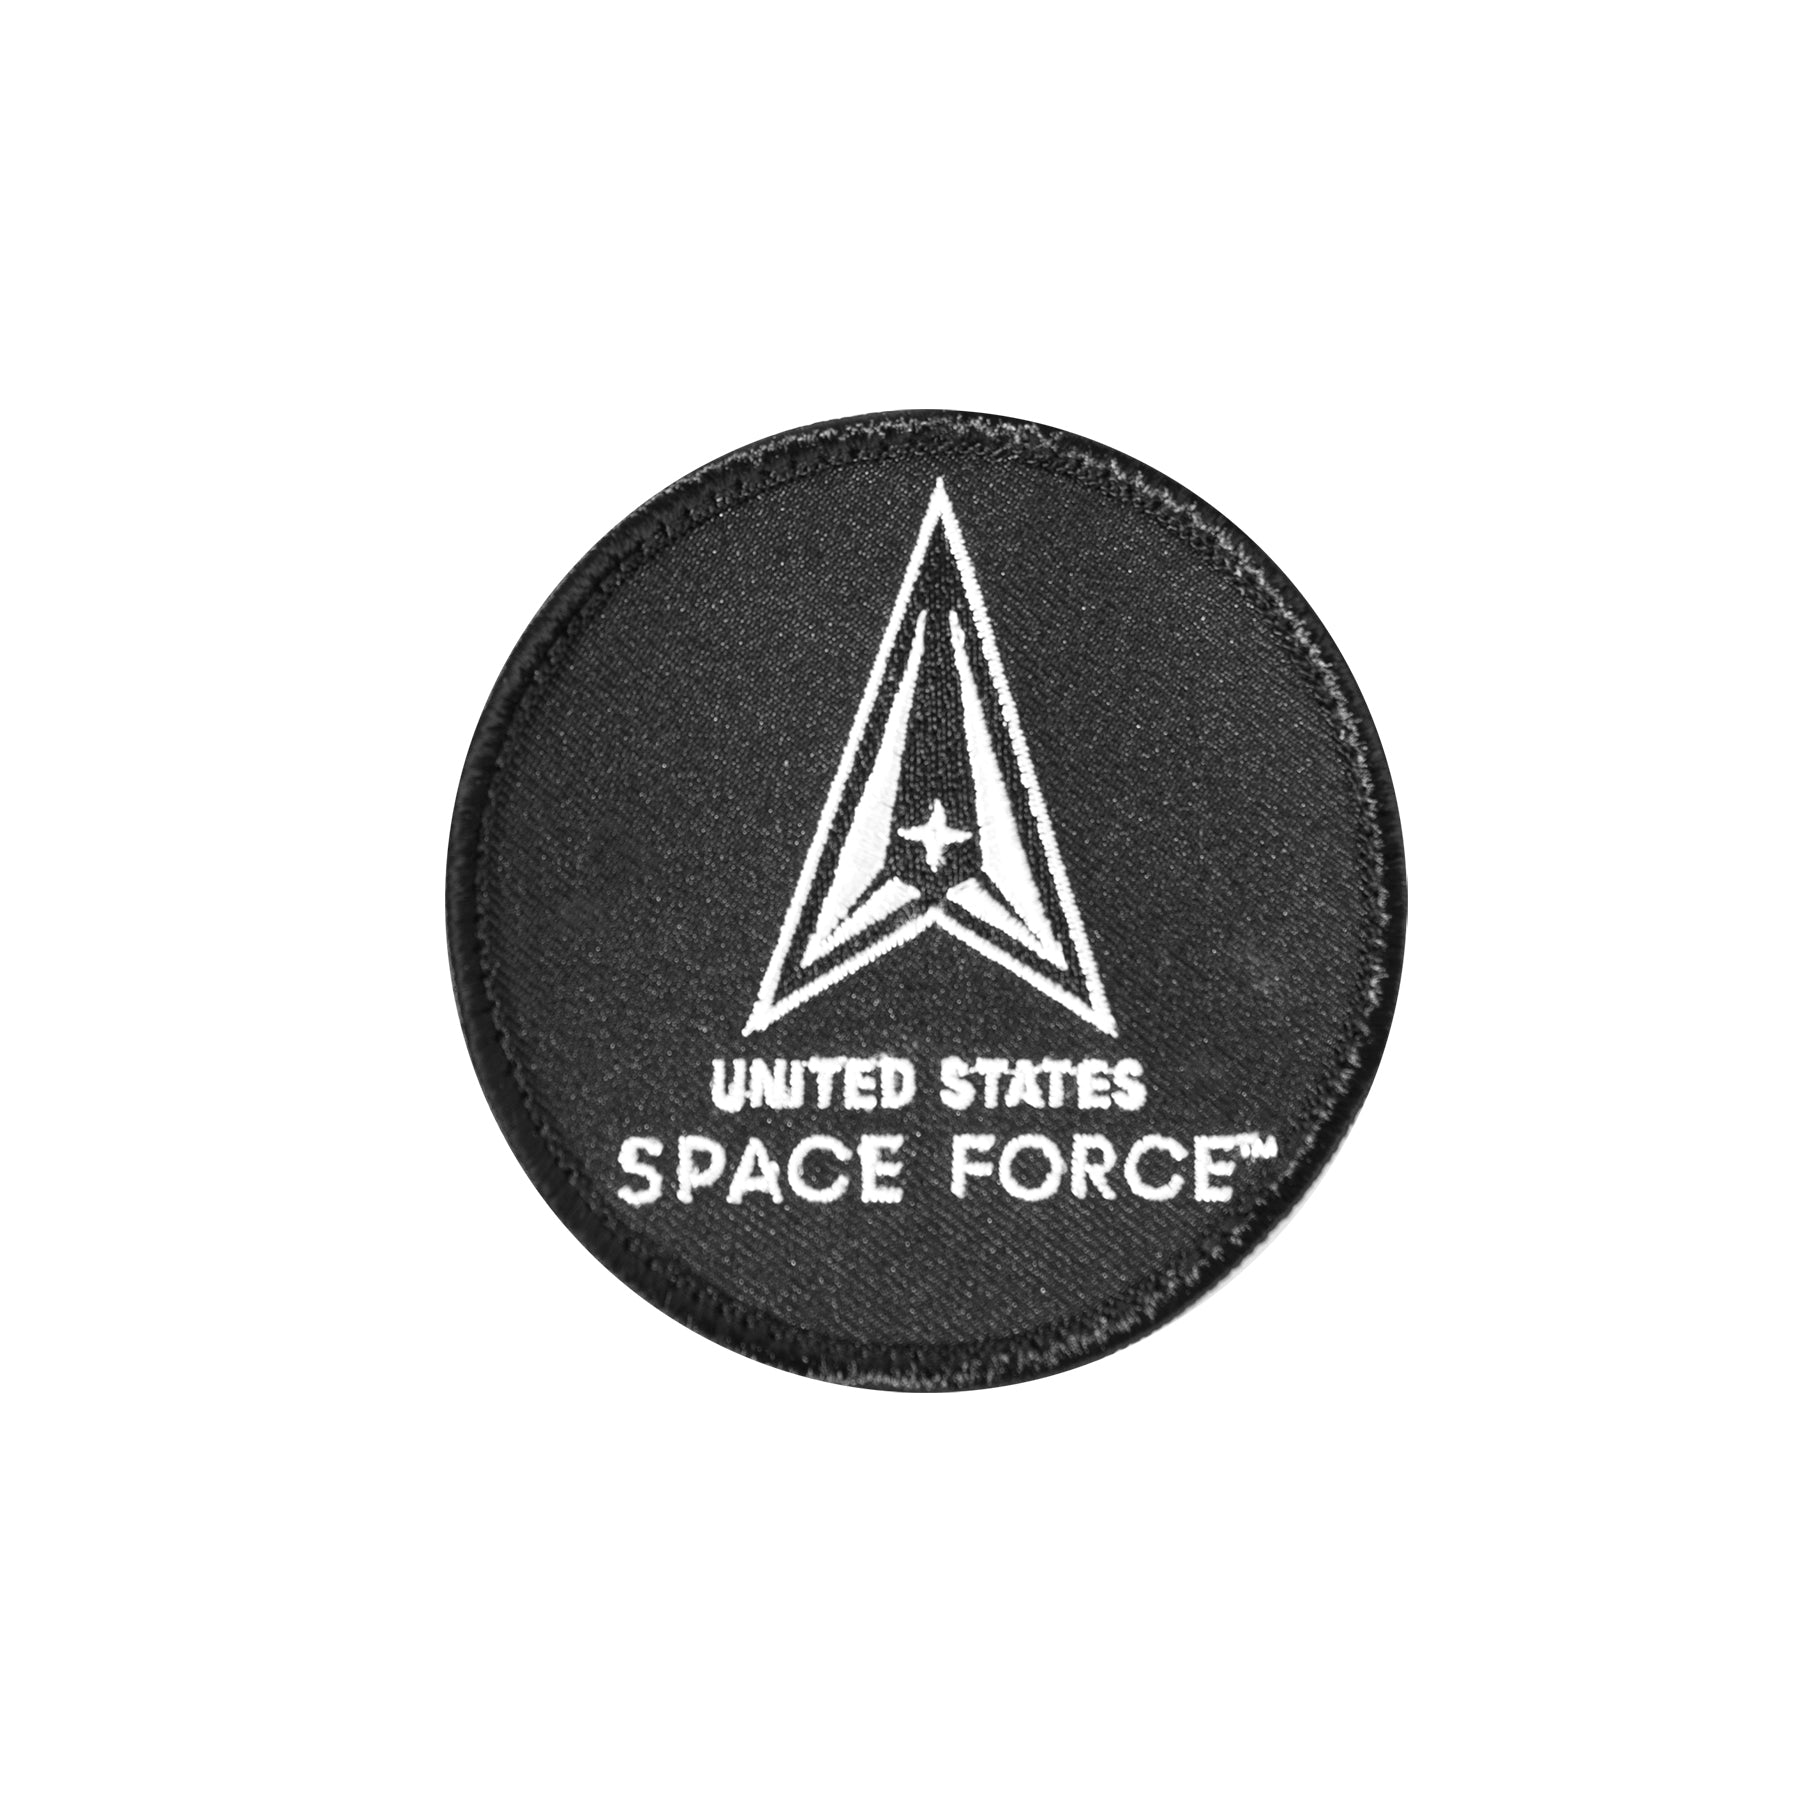 Rothco US Space Force Patch Round With Hook Back